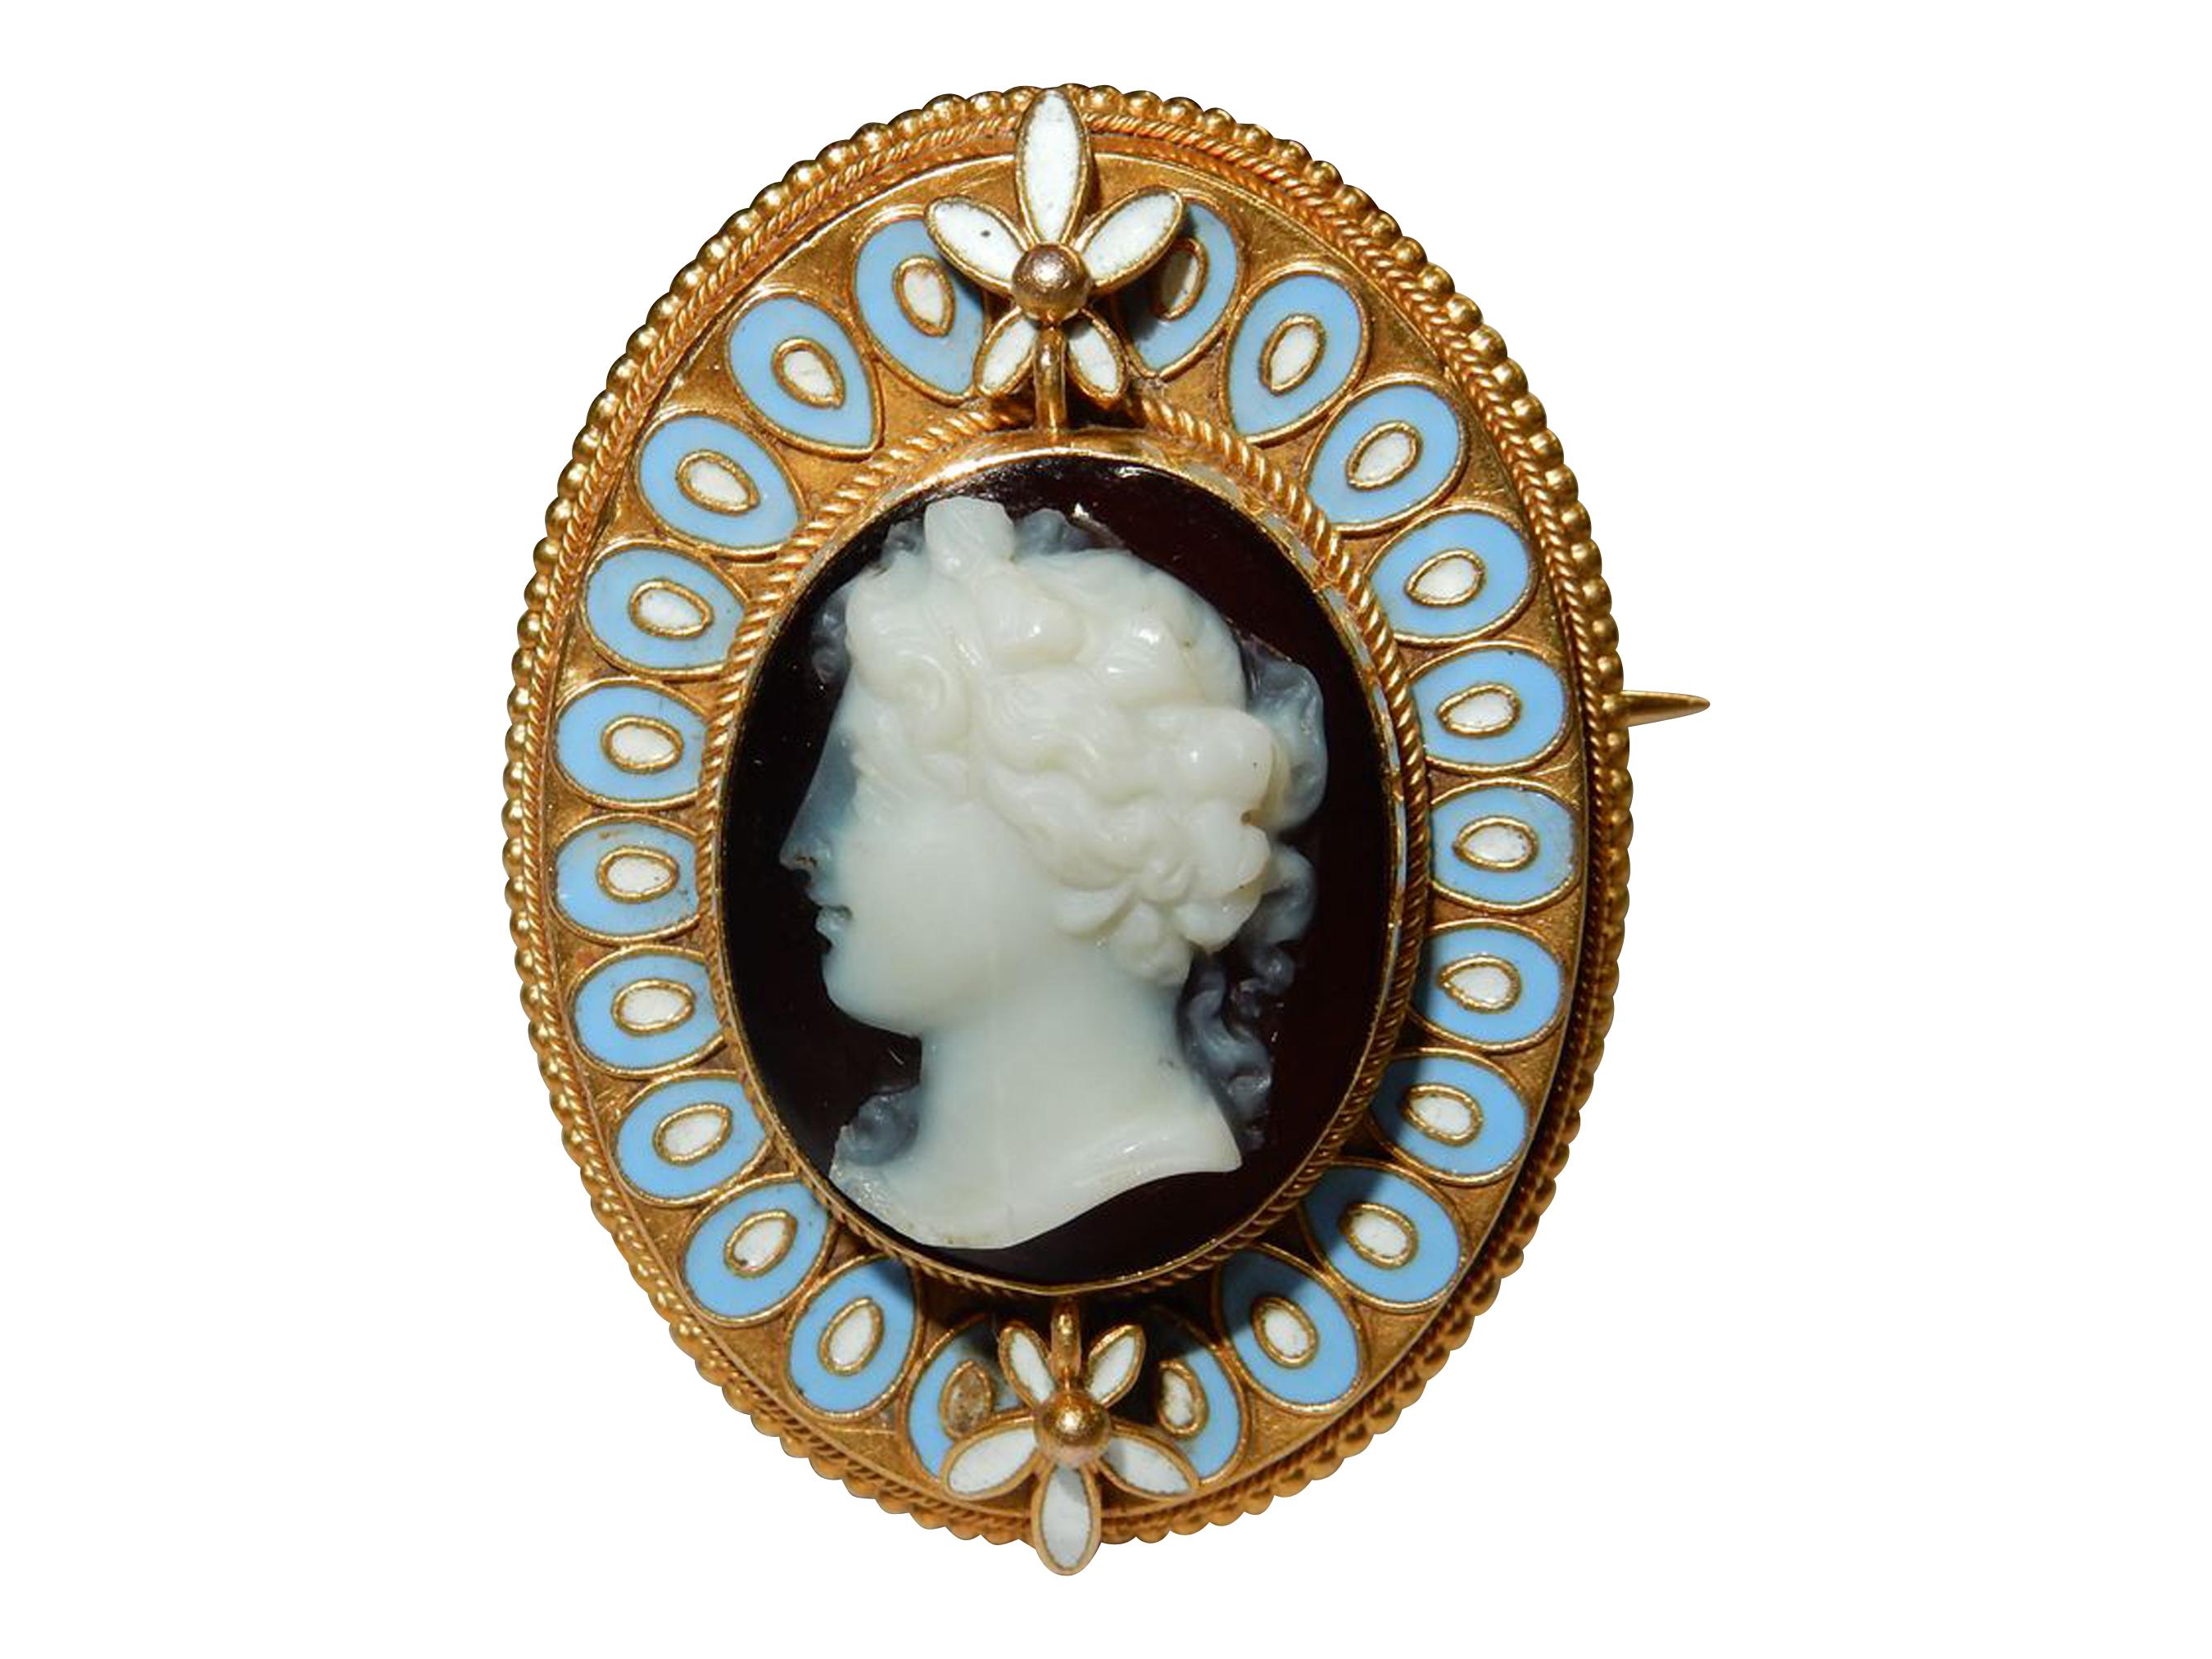 Important Exquisite Rare Antique Hardstone Gold & Enamel Cameo Brooch For Sale 6